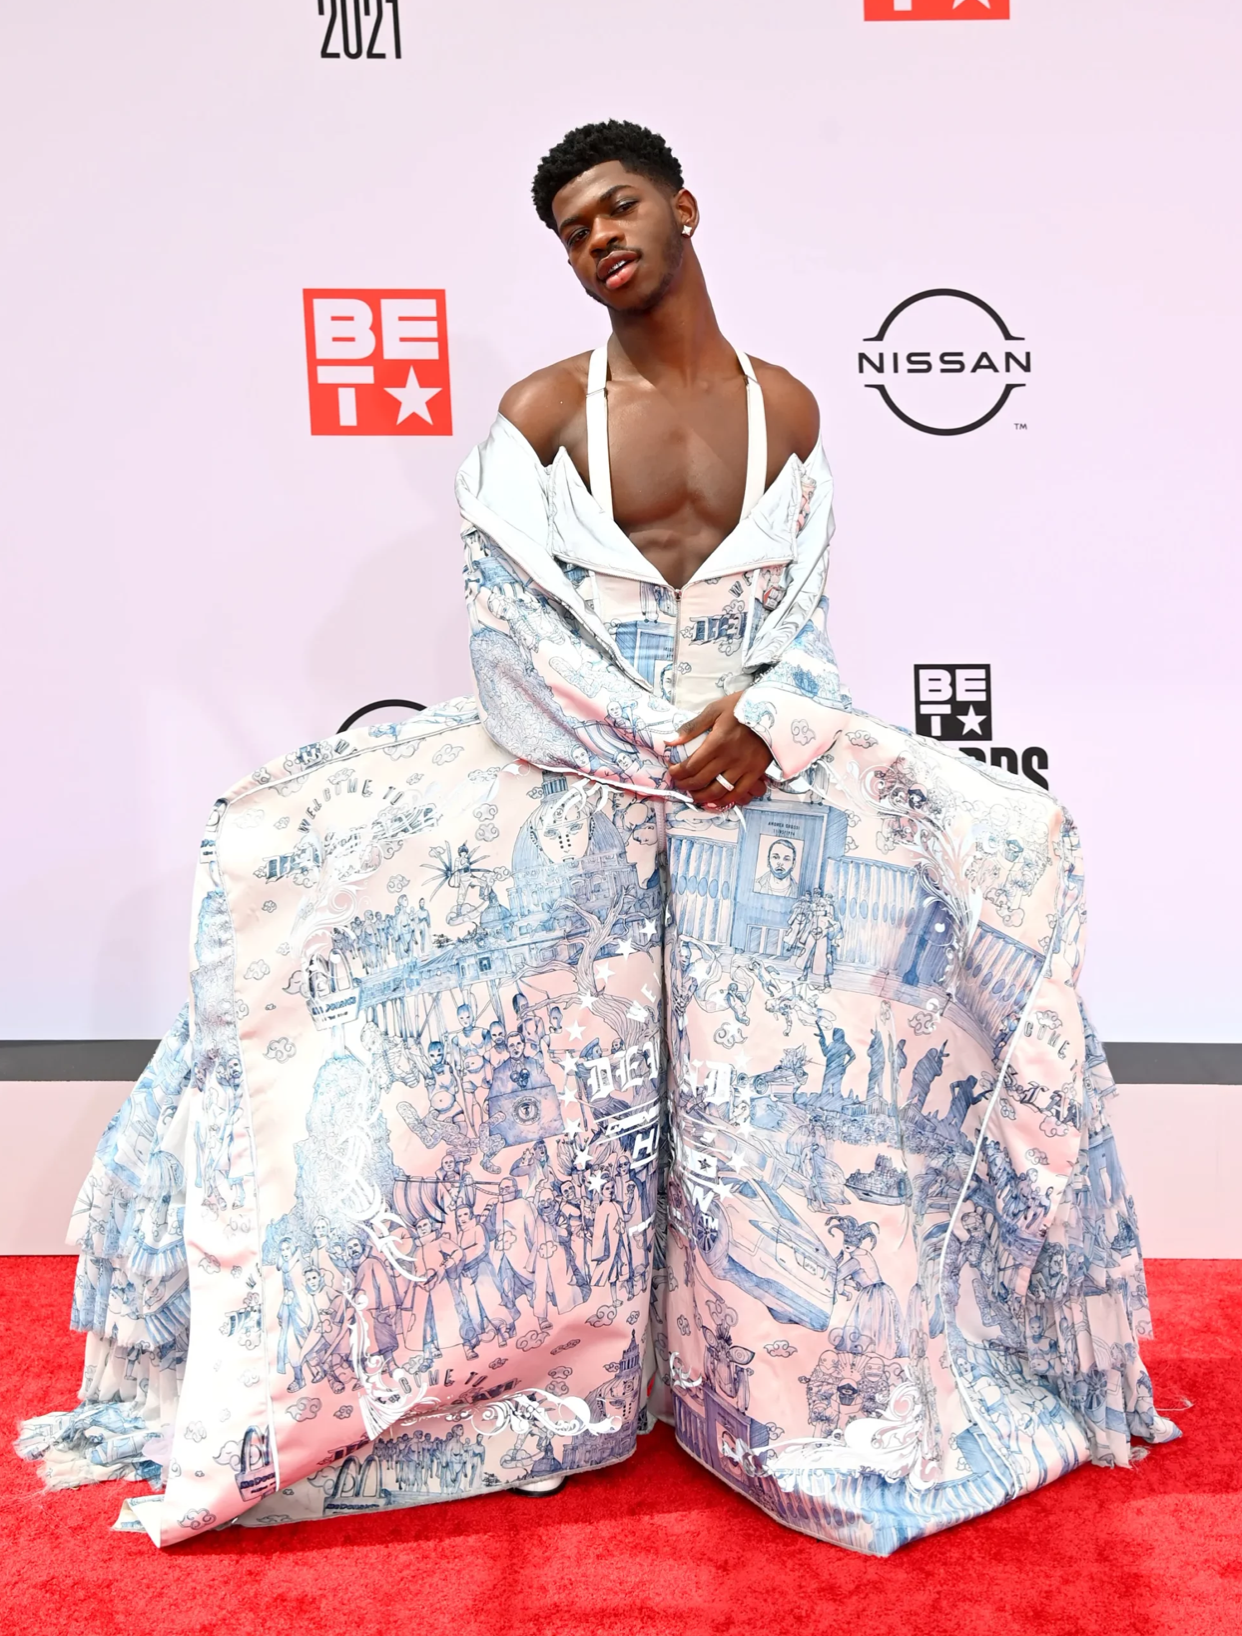 Lil Nas X attends the 2021 BET Awards